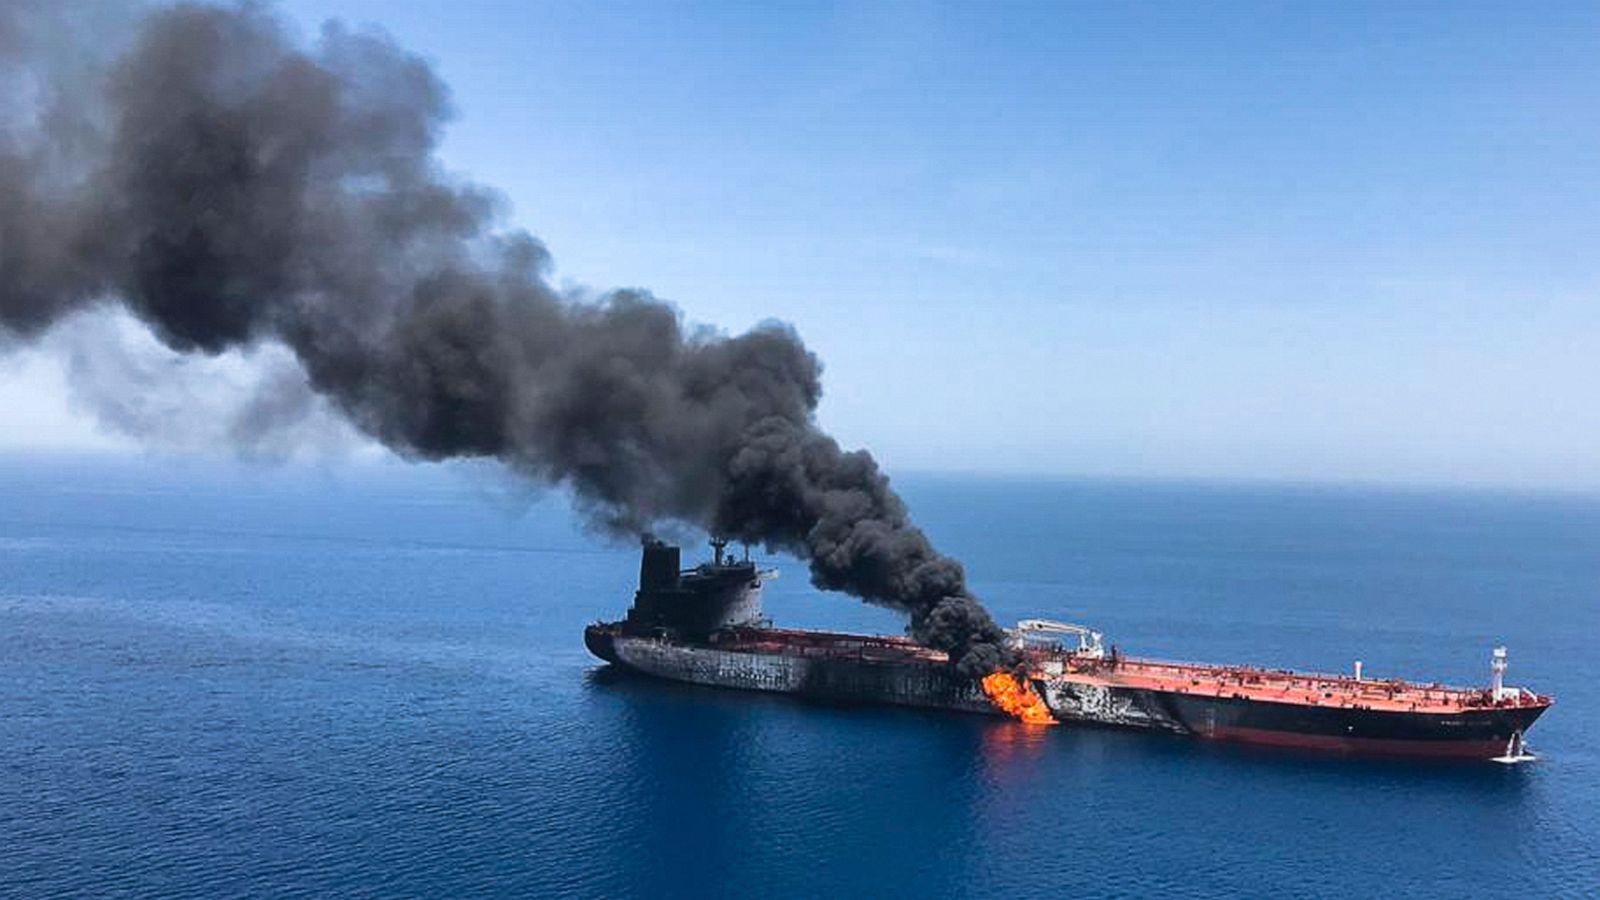 Polar Merchandising wireless Iran attempted to shoot down US drone over tanker attack site in Gulf of  Oman - ABC News